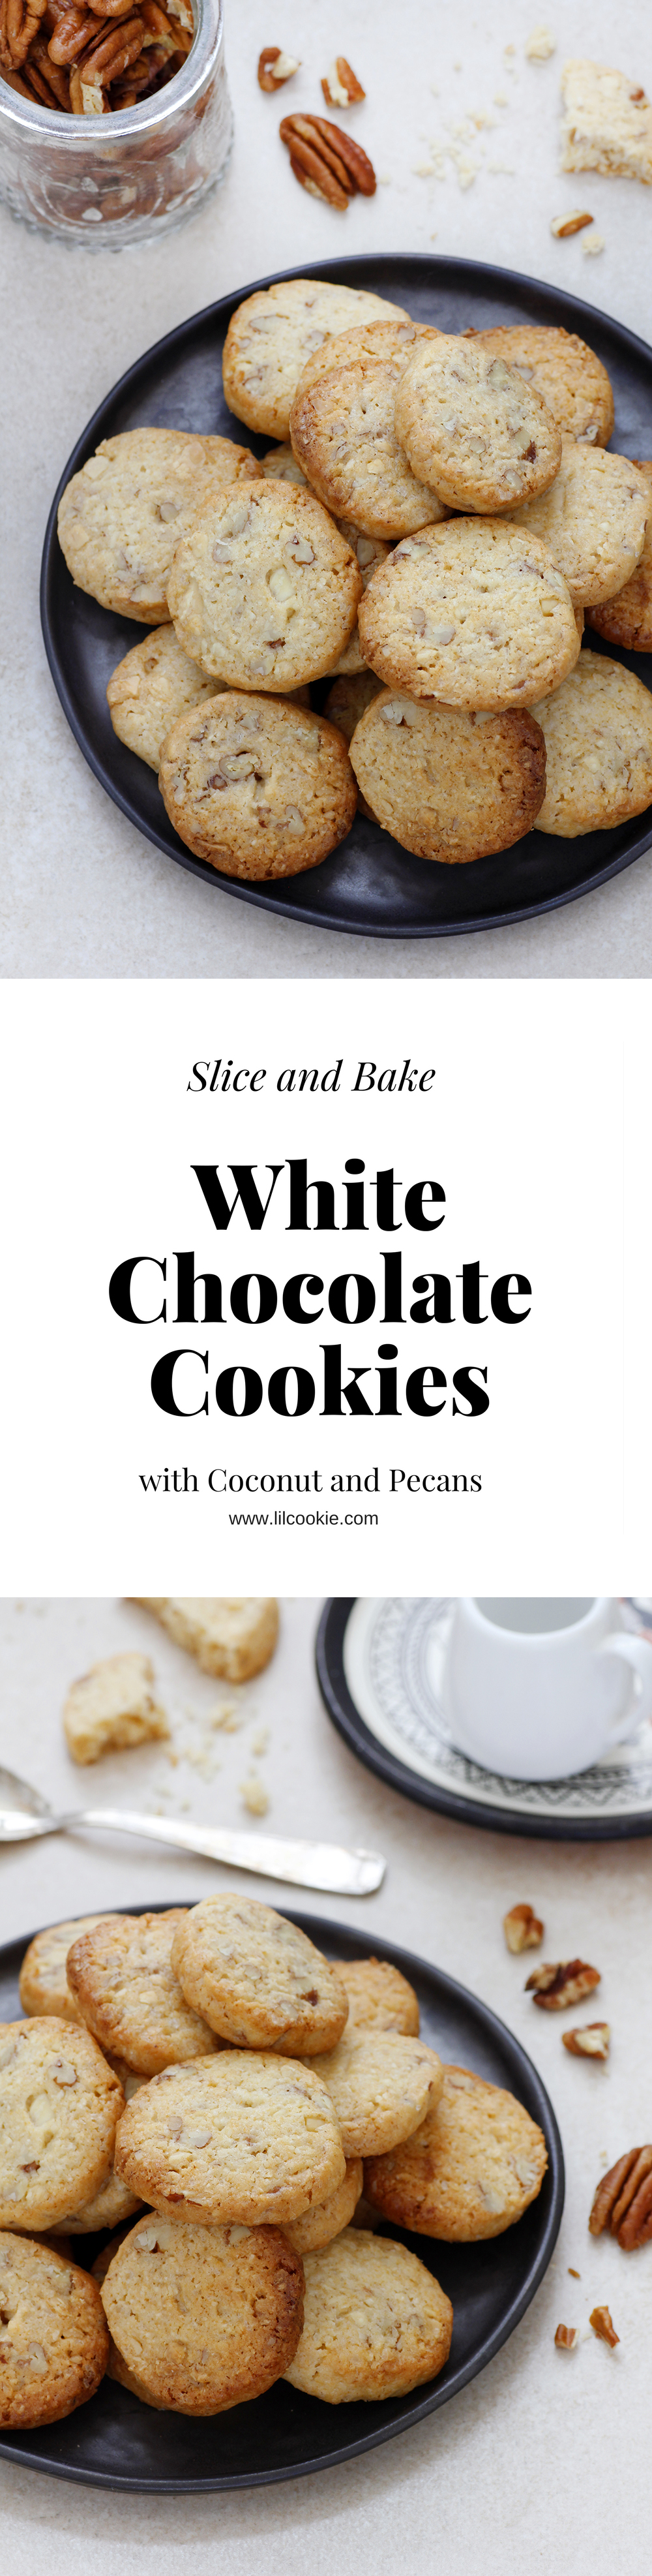 Slice and Bake White Chocolate Cookies with Coconut and Pecans #recipe #whitechocolate #cookies #pecans #coconut #christmas